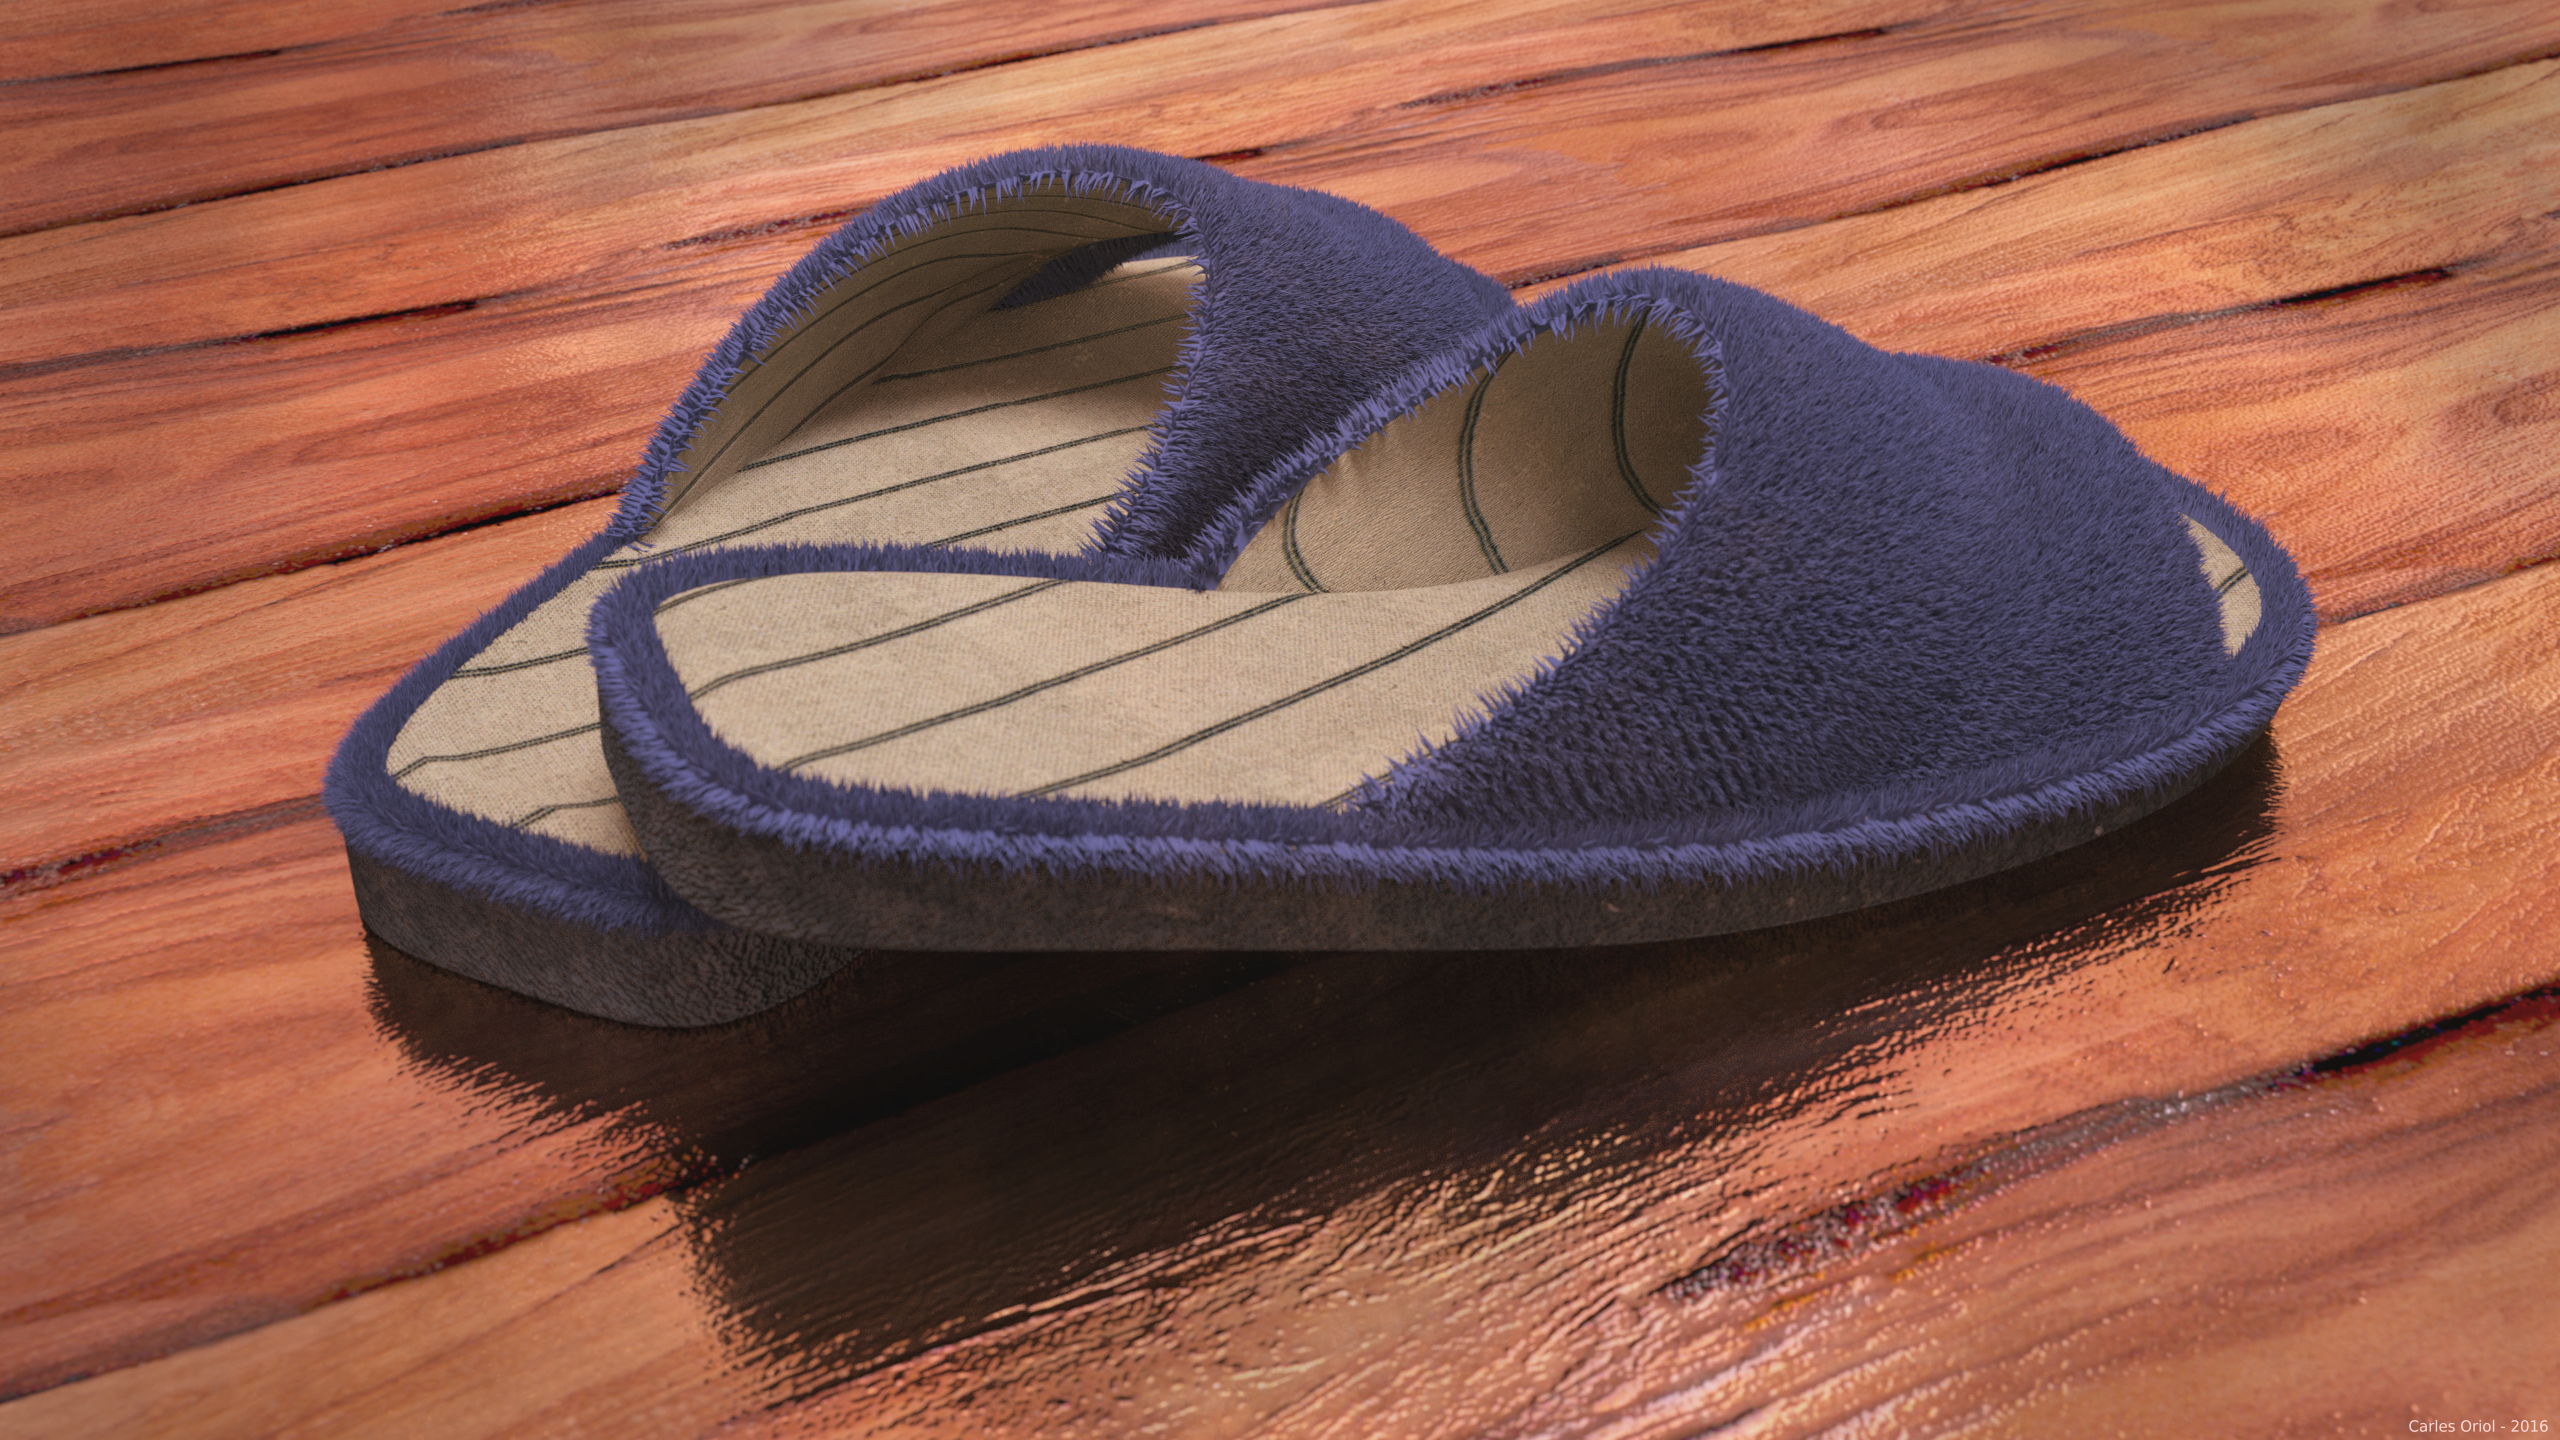 General 2560x1440 wooden surface slippers shoes closeup